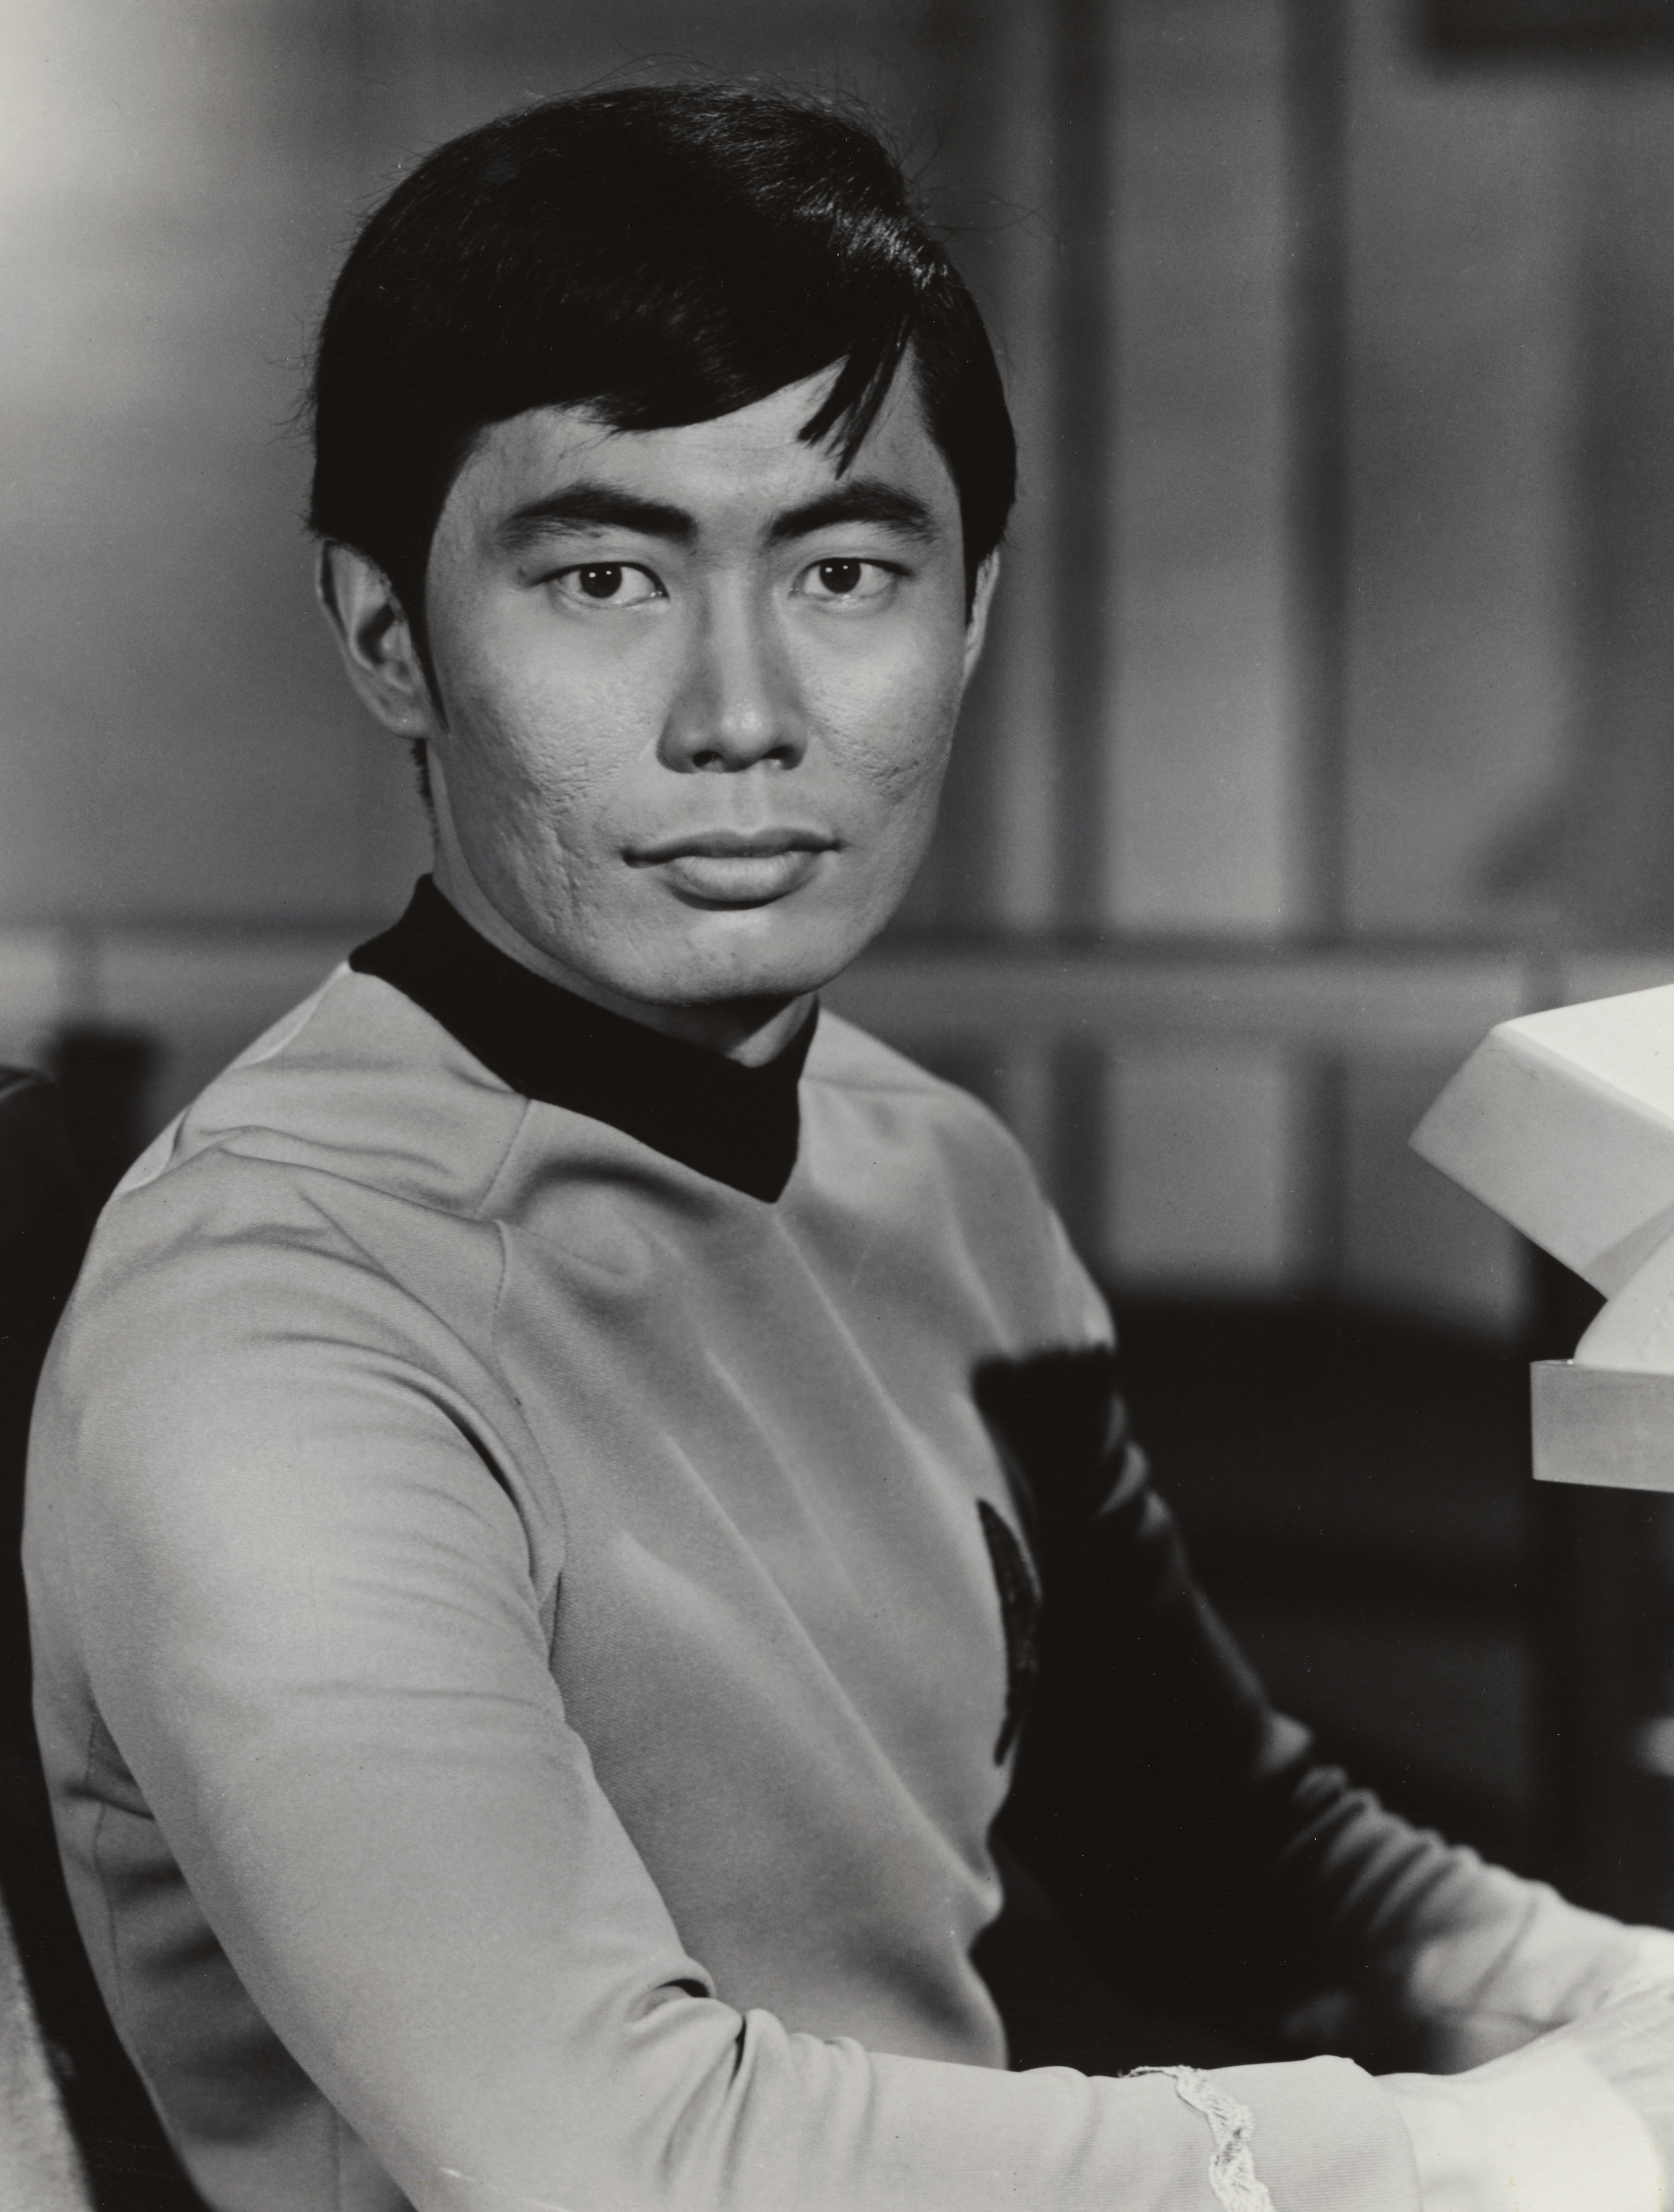 Sulu, the navigator of the Starship Enterprise in the TV series, Star Trek, was the character played by George Takei